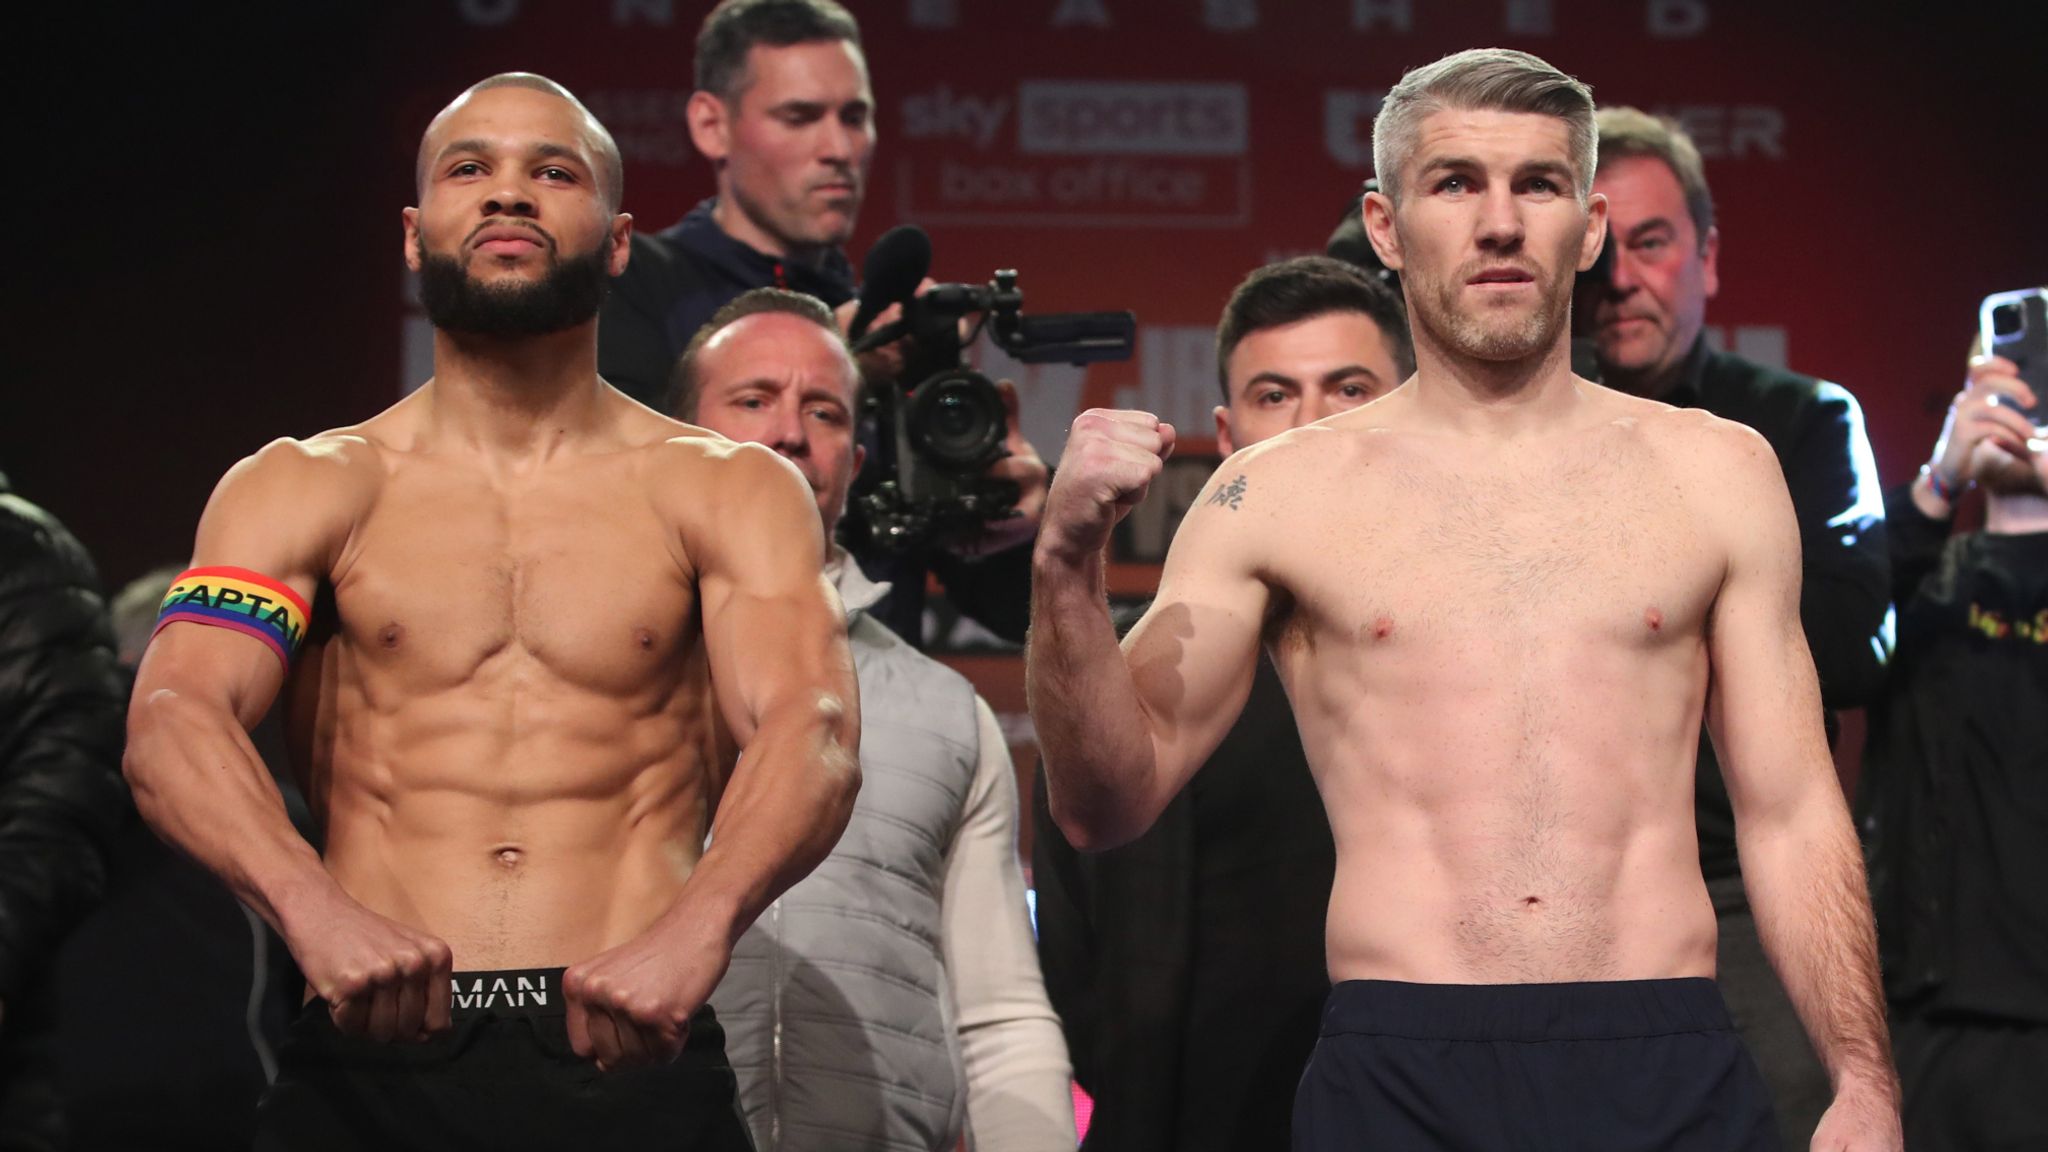 Chris Eubank eyeing world title fight with Liam Smith or Zhanibek  Alimkhanuly; Gennadiy Golovkin also potential option after Canelo Alvarez  loss, Boxing News